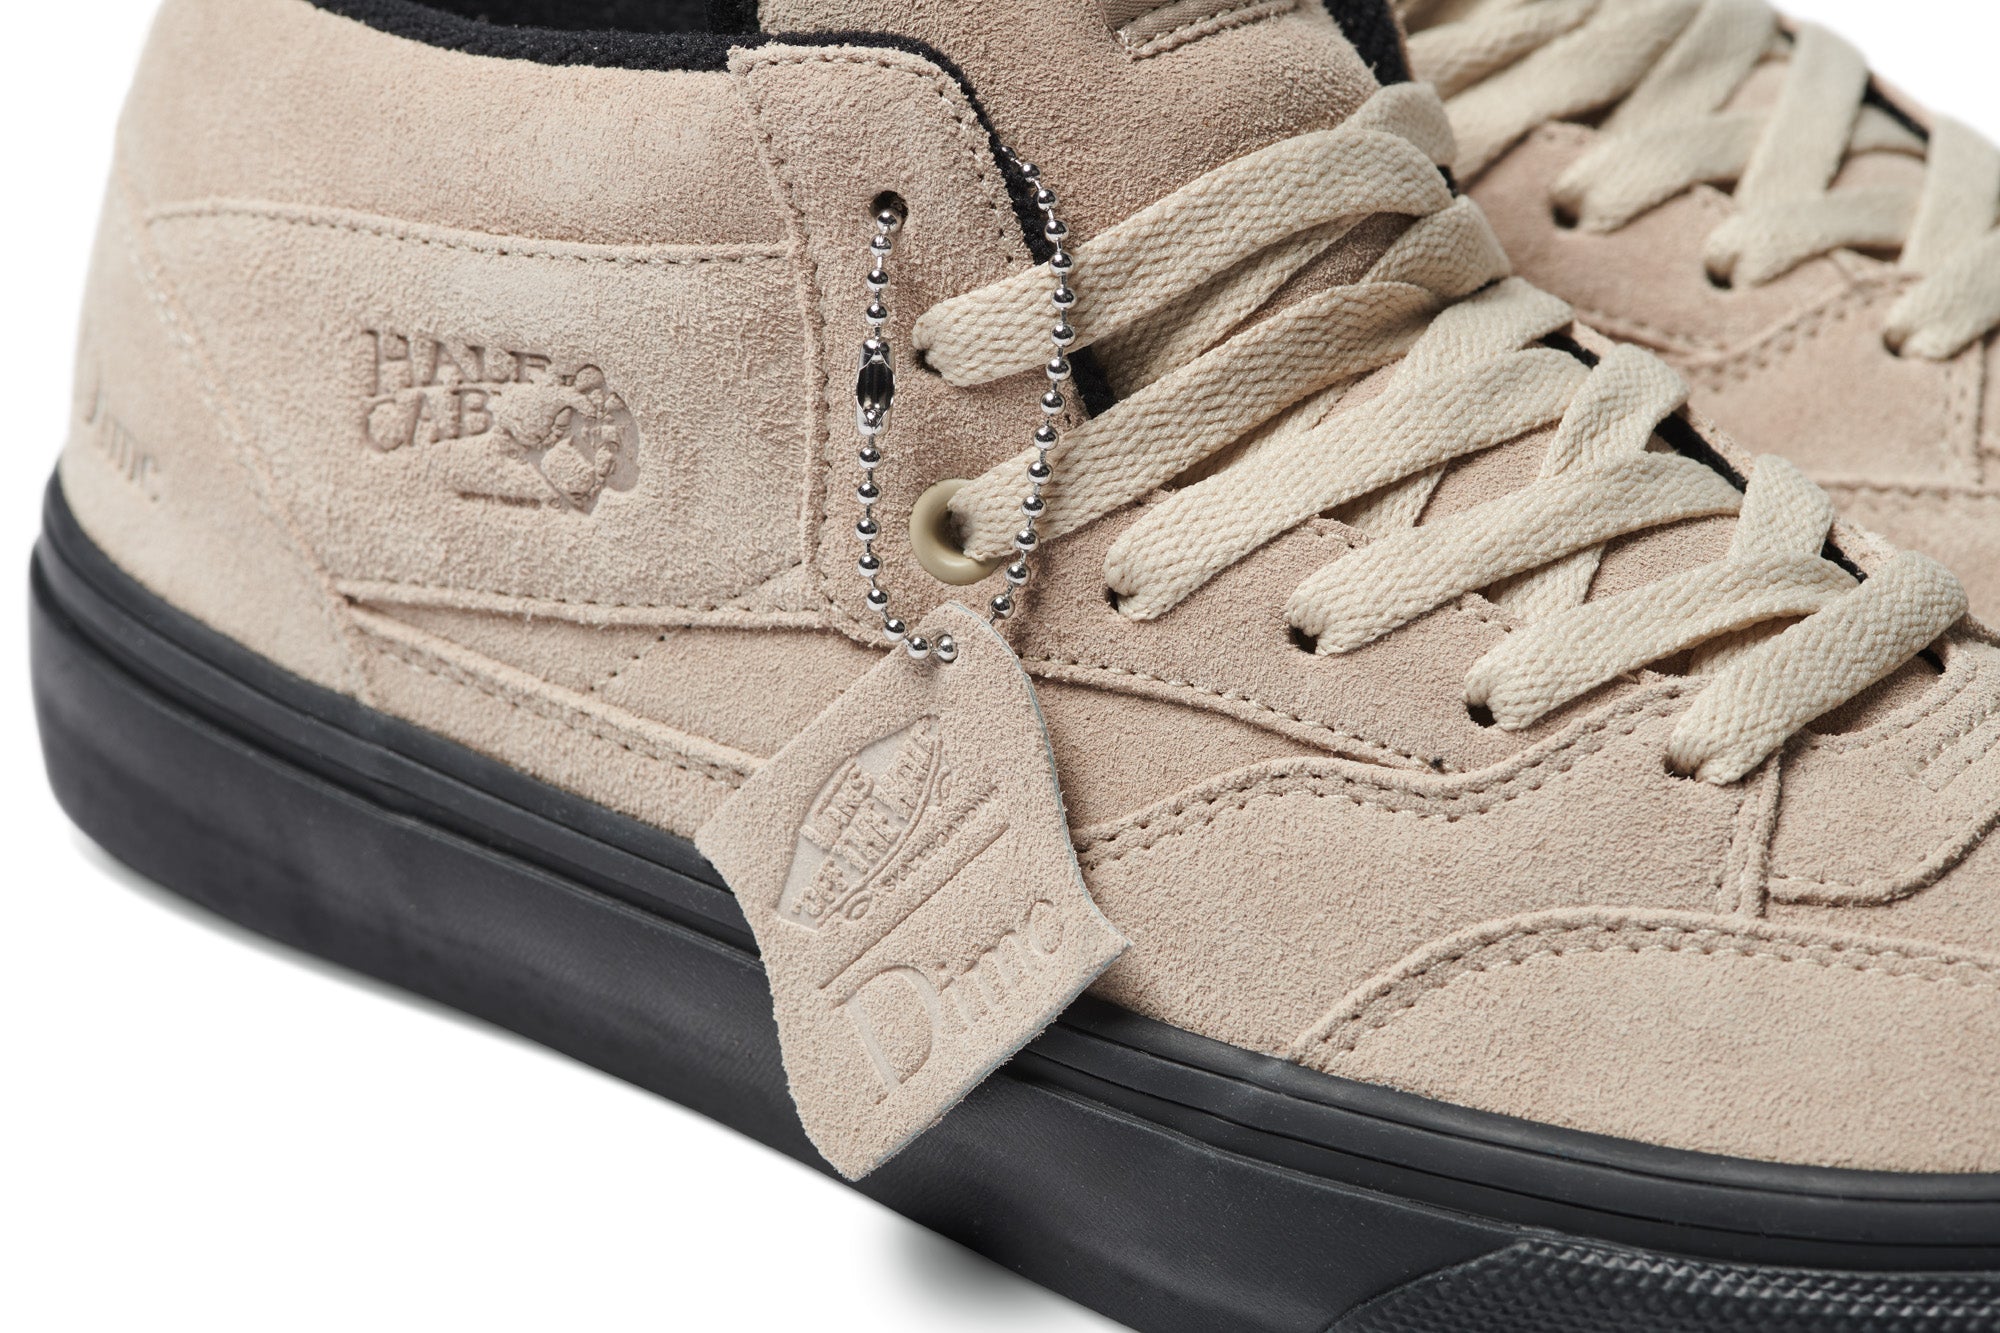 Skate Half Cab '92 Dime Shoes Tan (size options listed)